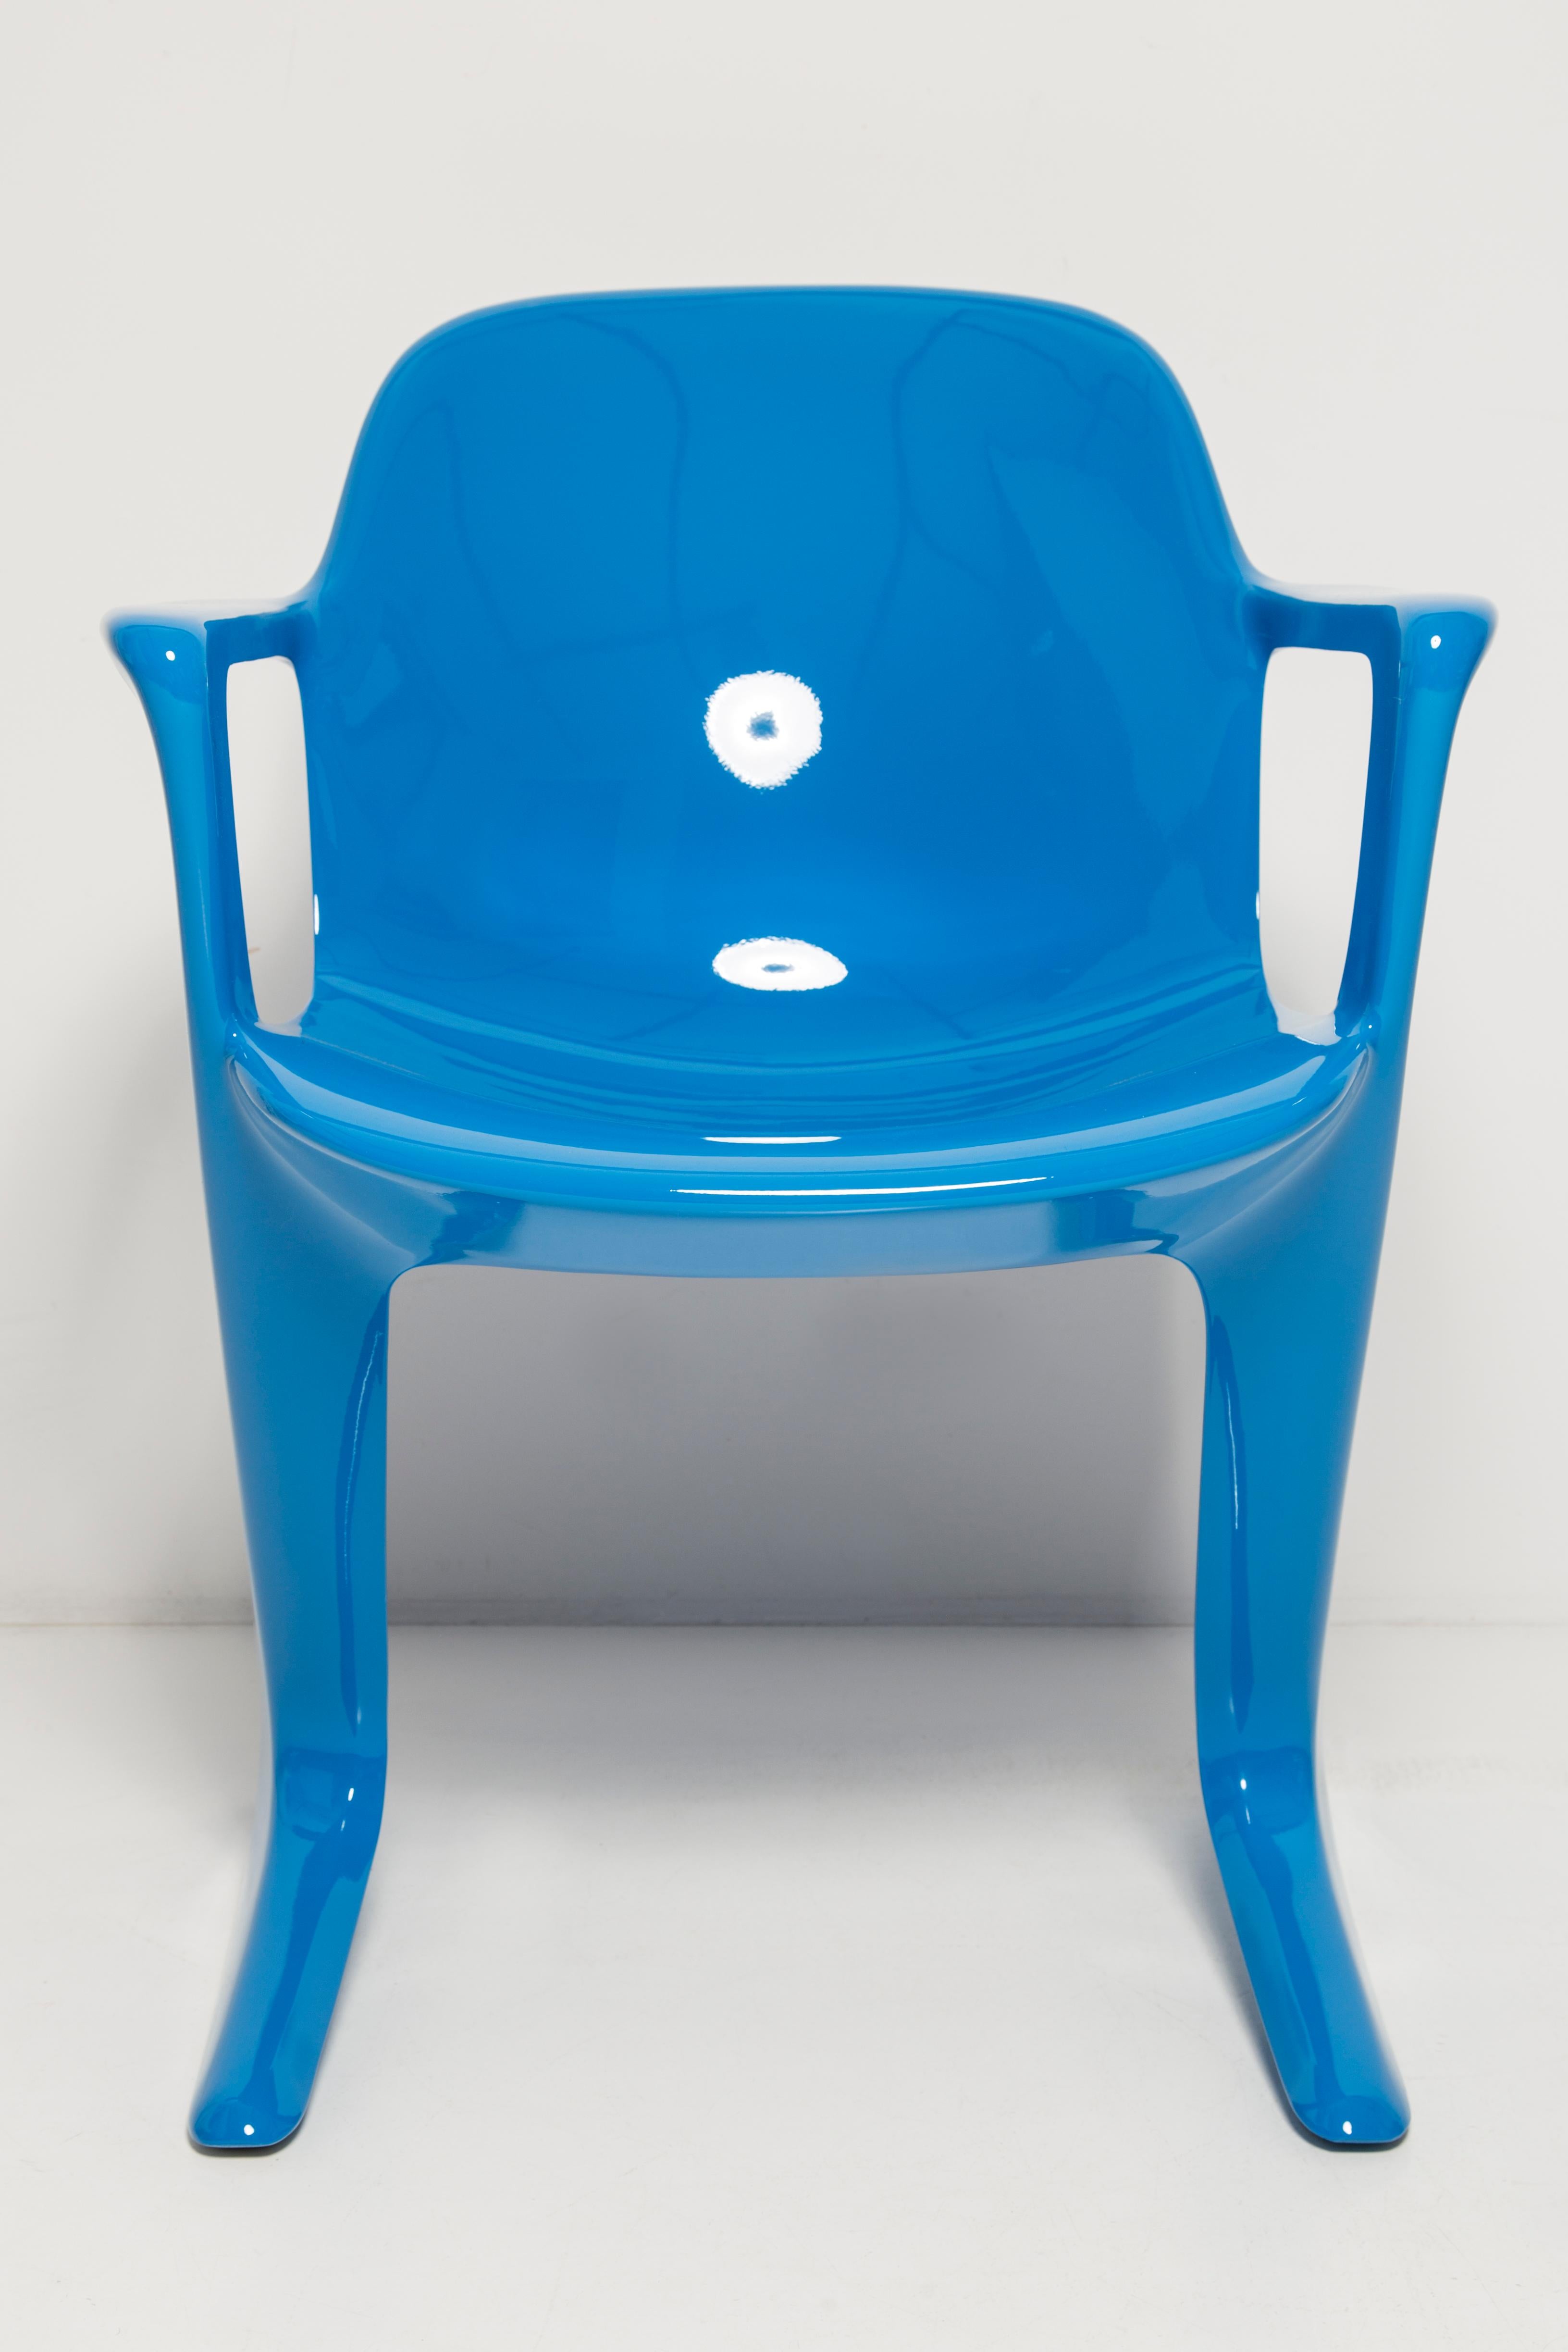 Set of Two Blue Kangaroo Chairs Designed by Ernst Moeckl, Germany, 1968 For Sale 3